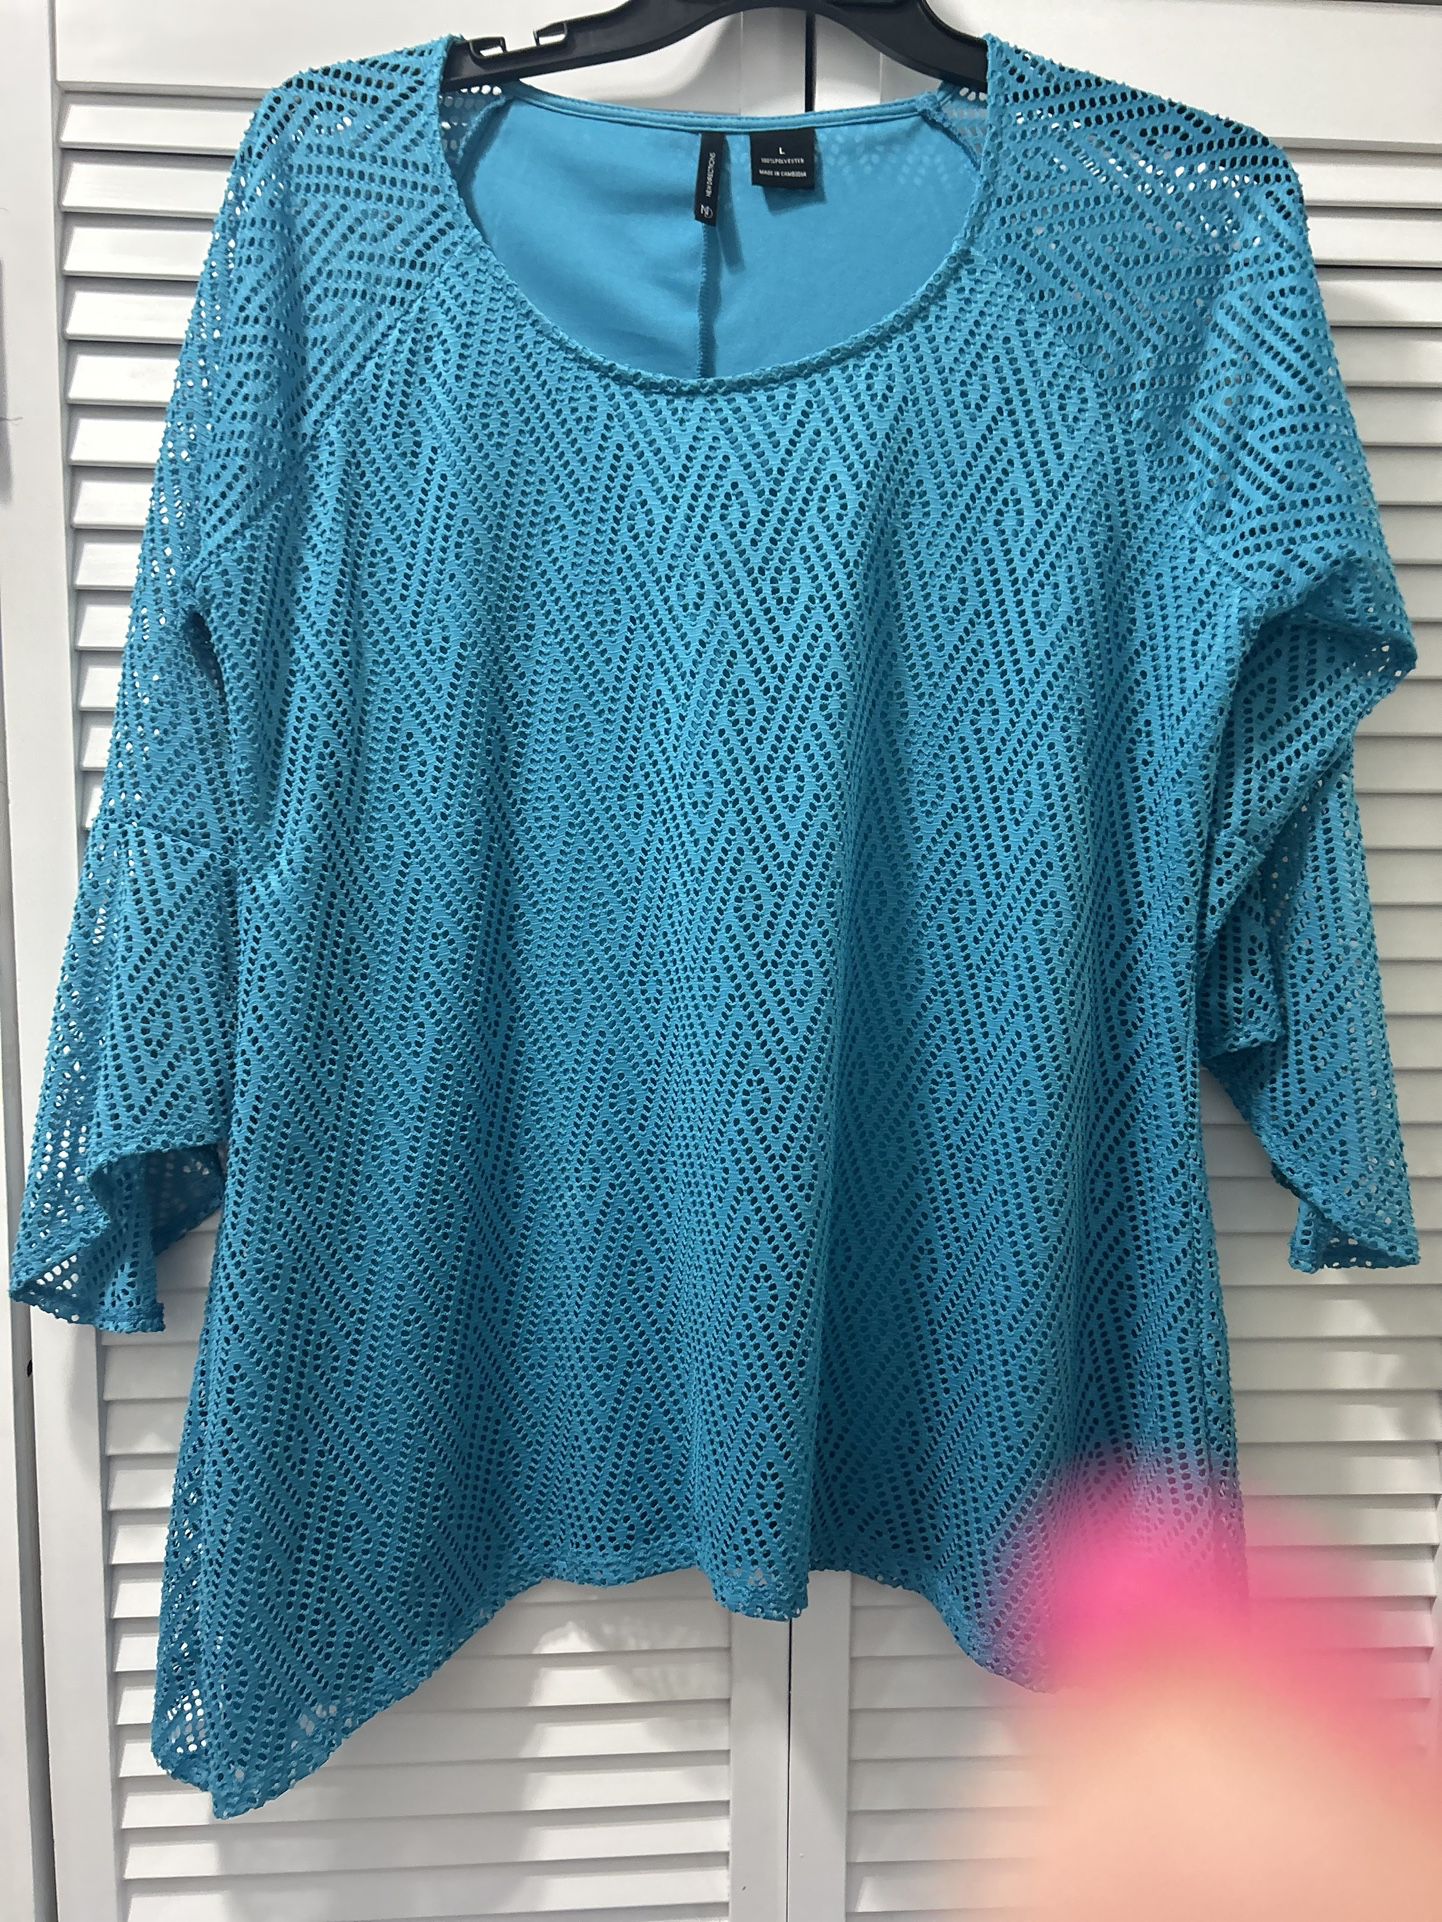 Size Large. Turquoise Blue. Tunic Top